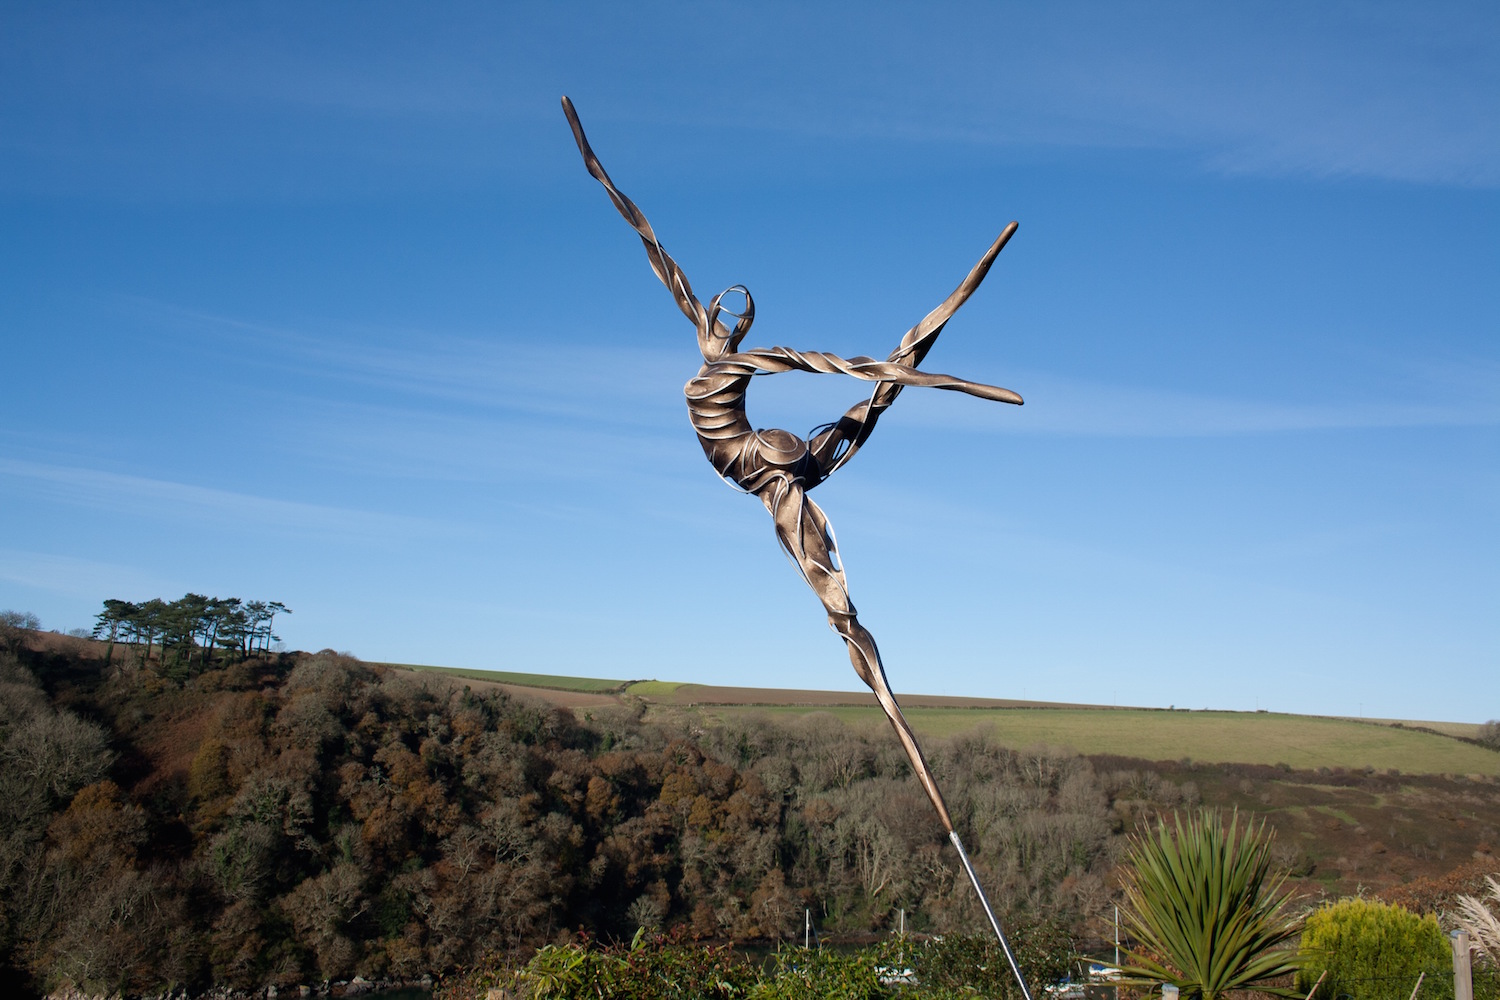 Among the contemporary works at the new Petworth Park Antiques and Fine Art Fair this month will be this outdoor sculpture by Penny Hardy titled ‘Joie de Vivre,’ to be shown by local West Sussex art dealers Moncrieff Bray Gallery, priced at £1,500 ($2,275).